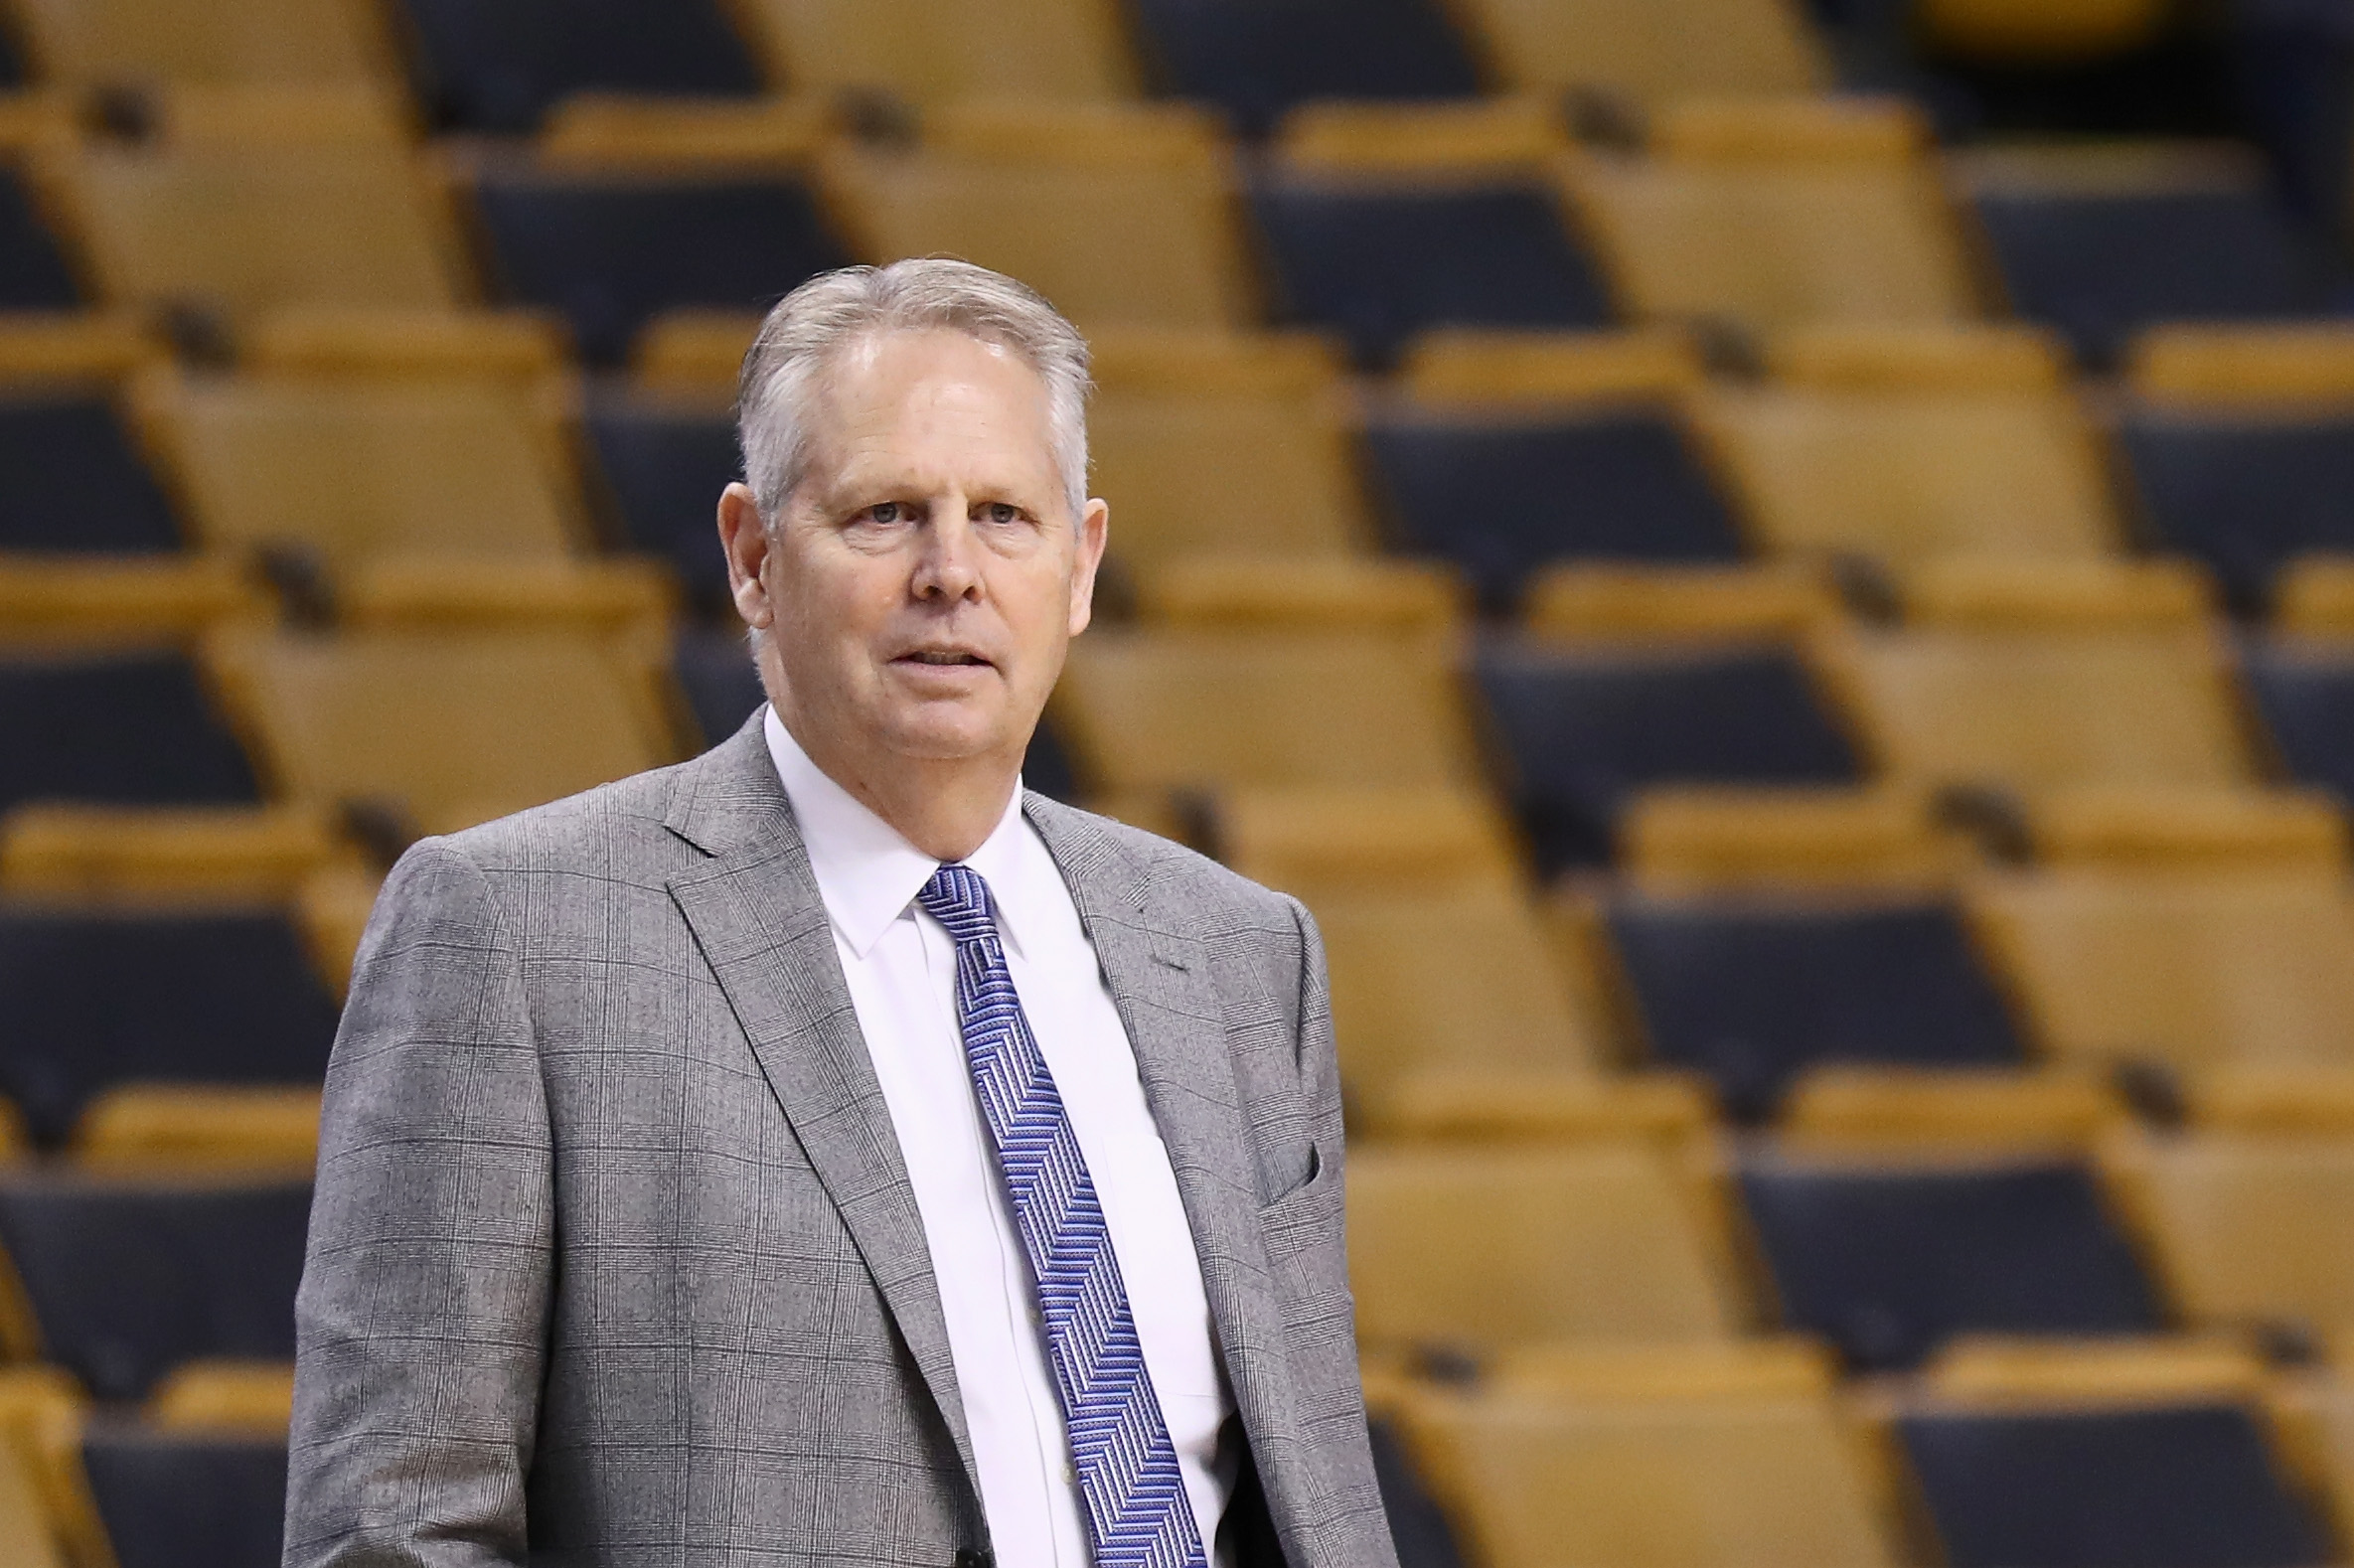 Danny Ainge pulls no punches when describing the state of the Boston Celtics.